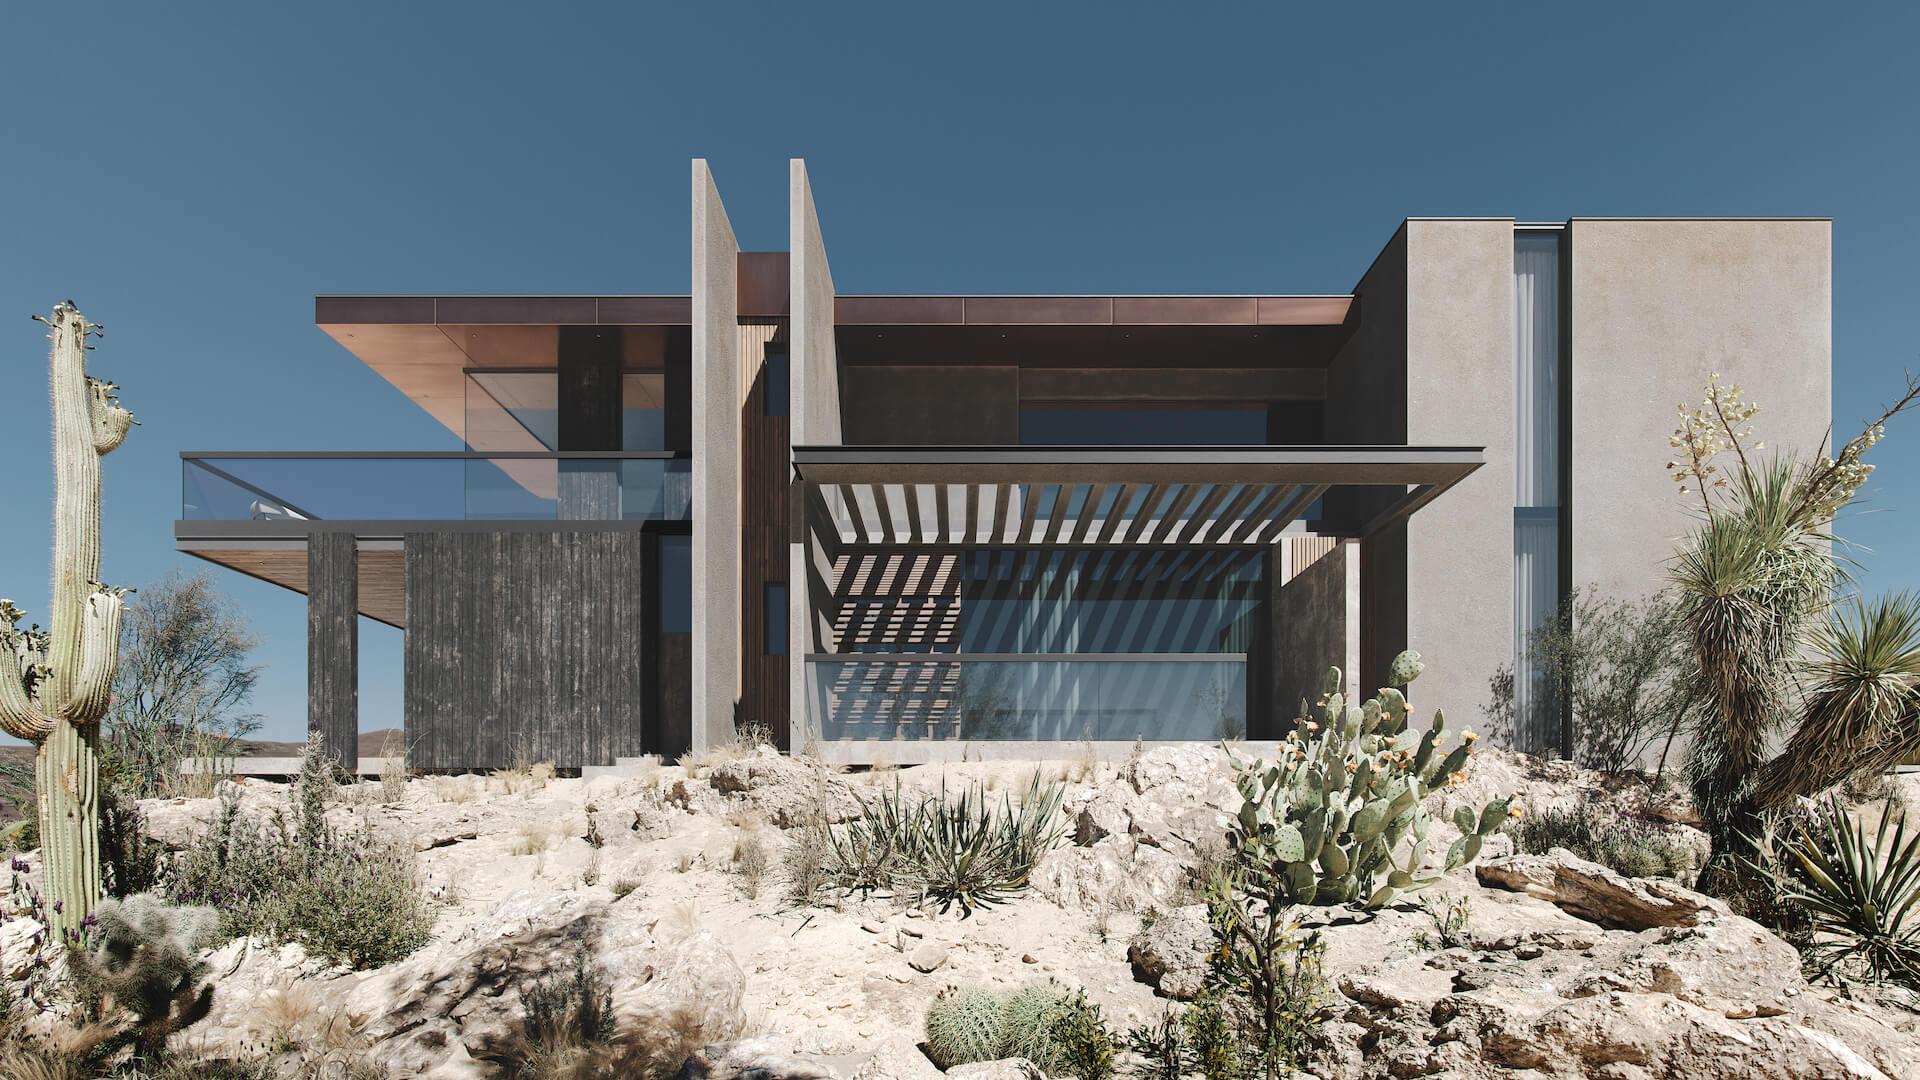 Architectural Rendering of a Contemporary Residence in the Desert